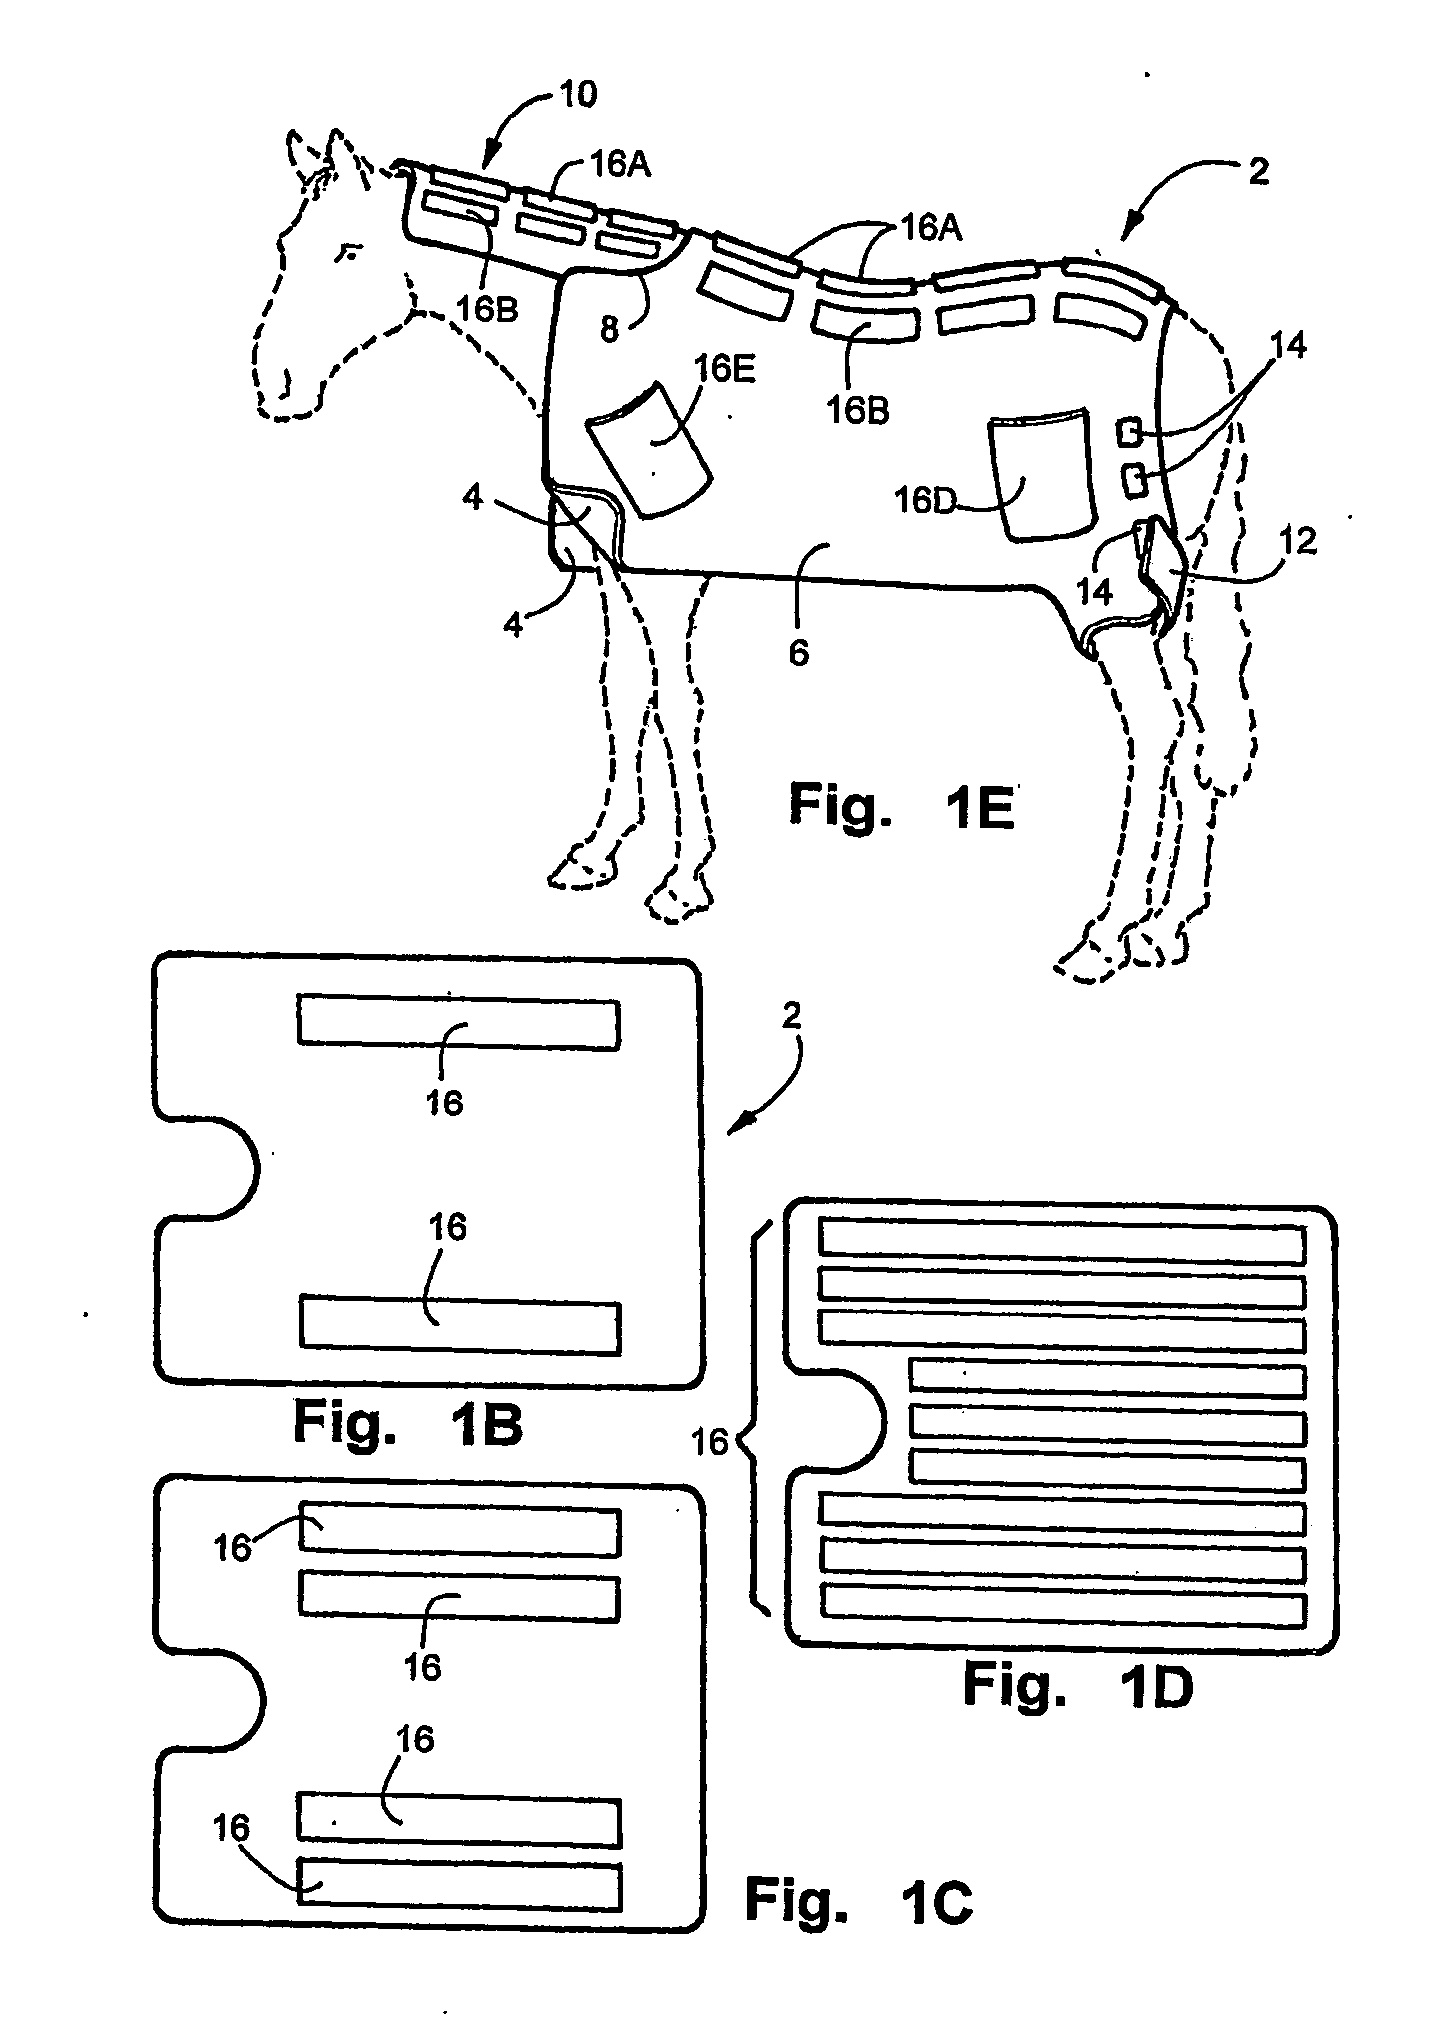 Animal cover having a temperature altering device